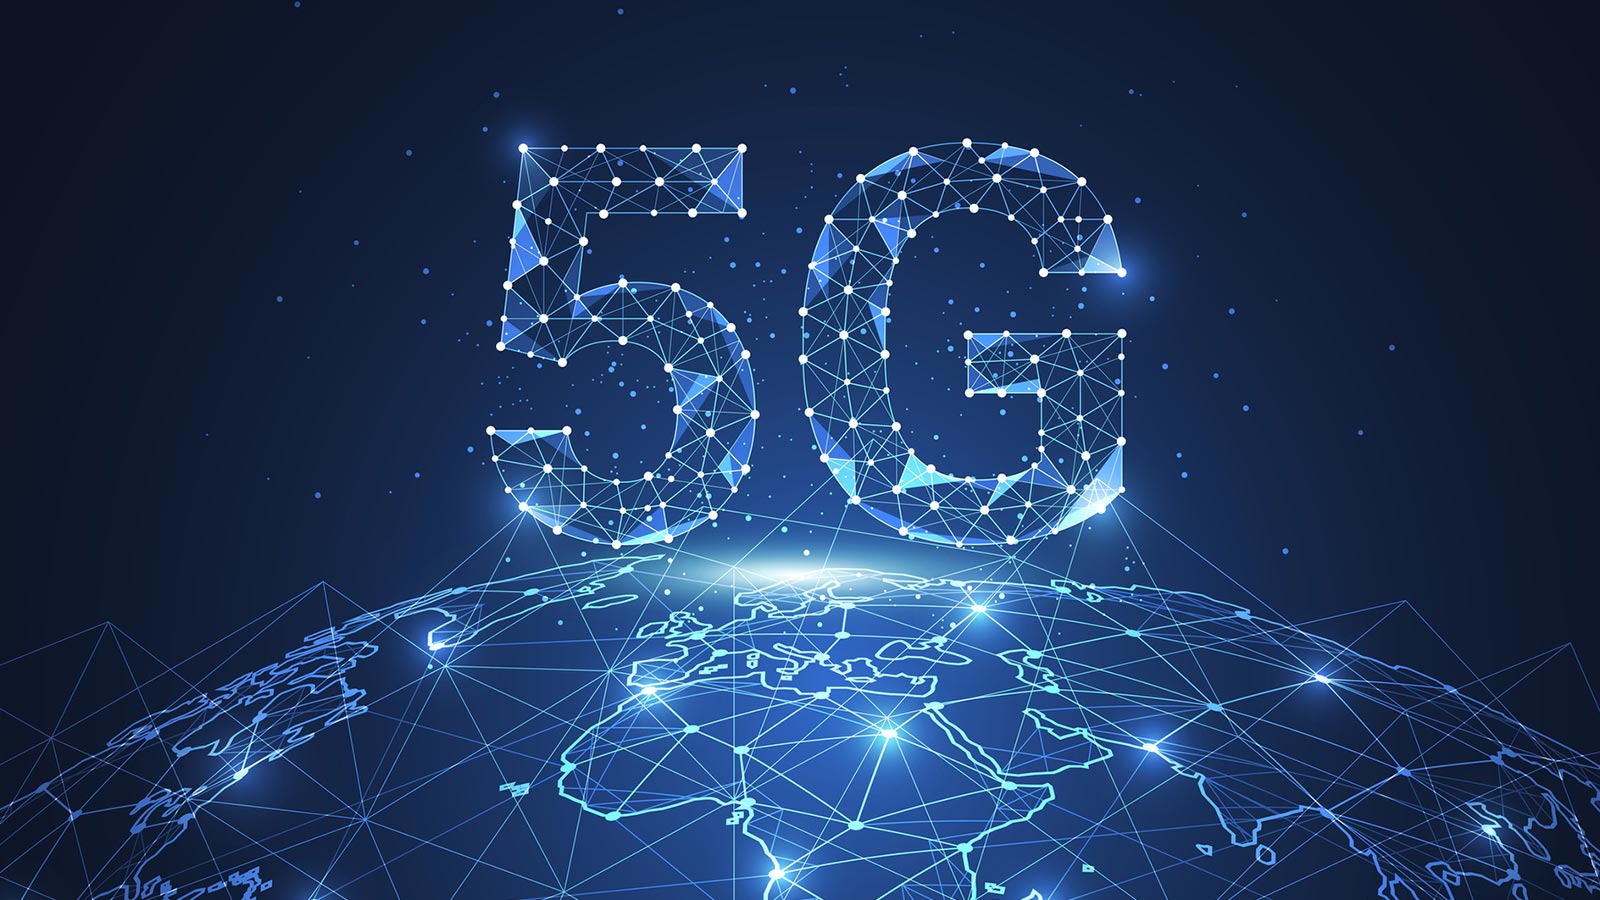 5G and the bipartisan infrastructure law could help end the digital divide